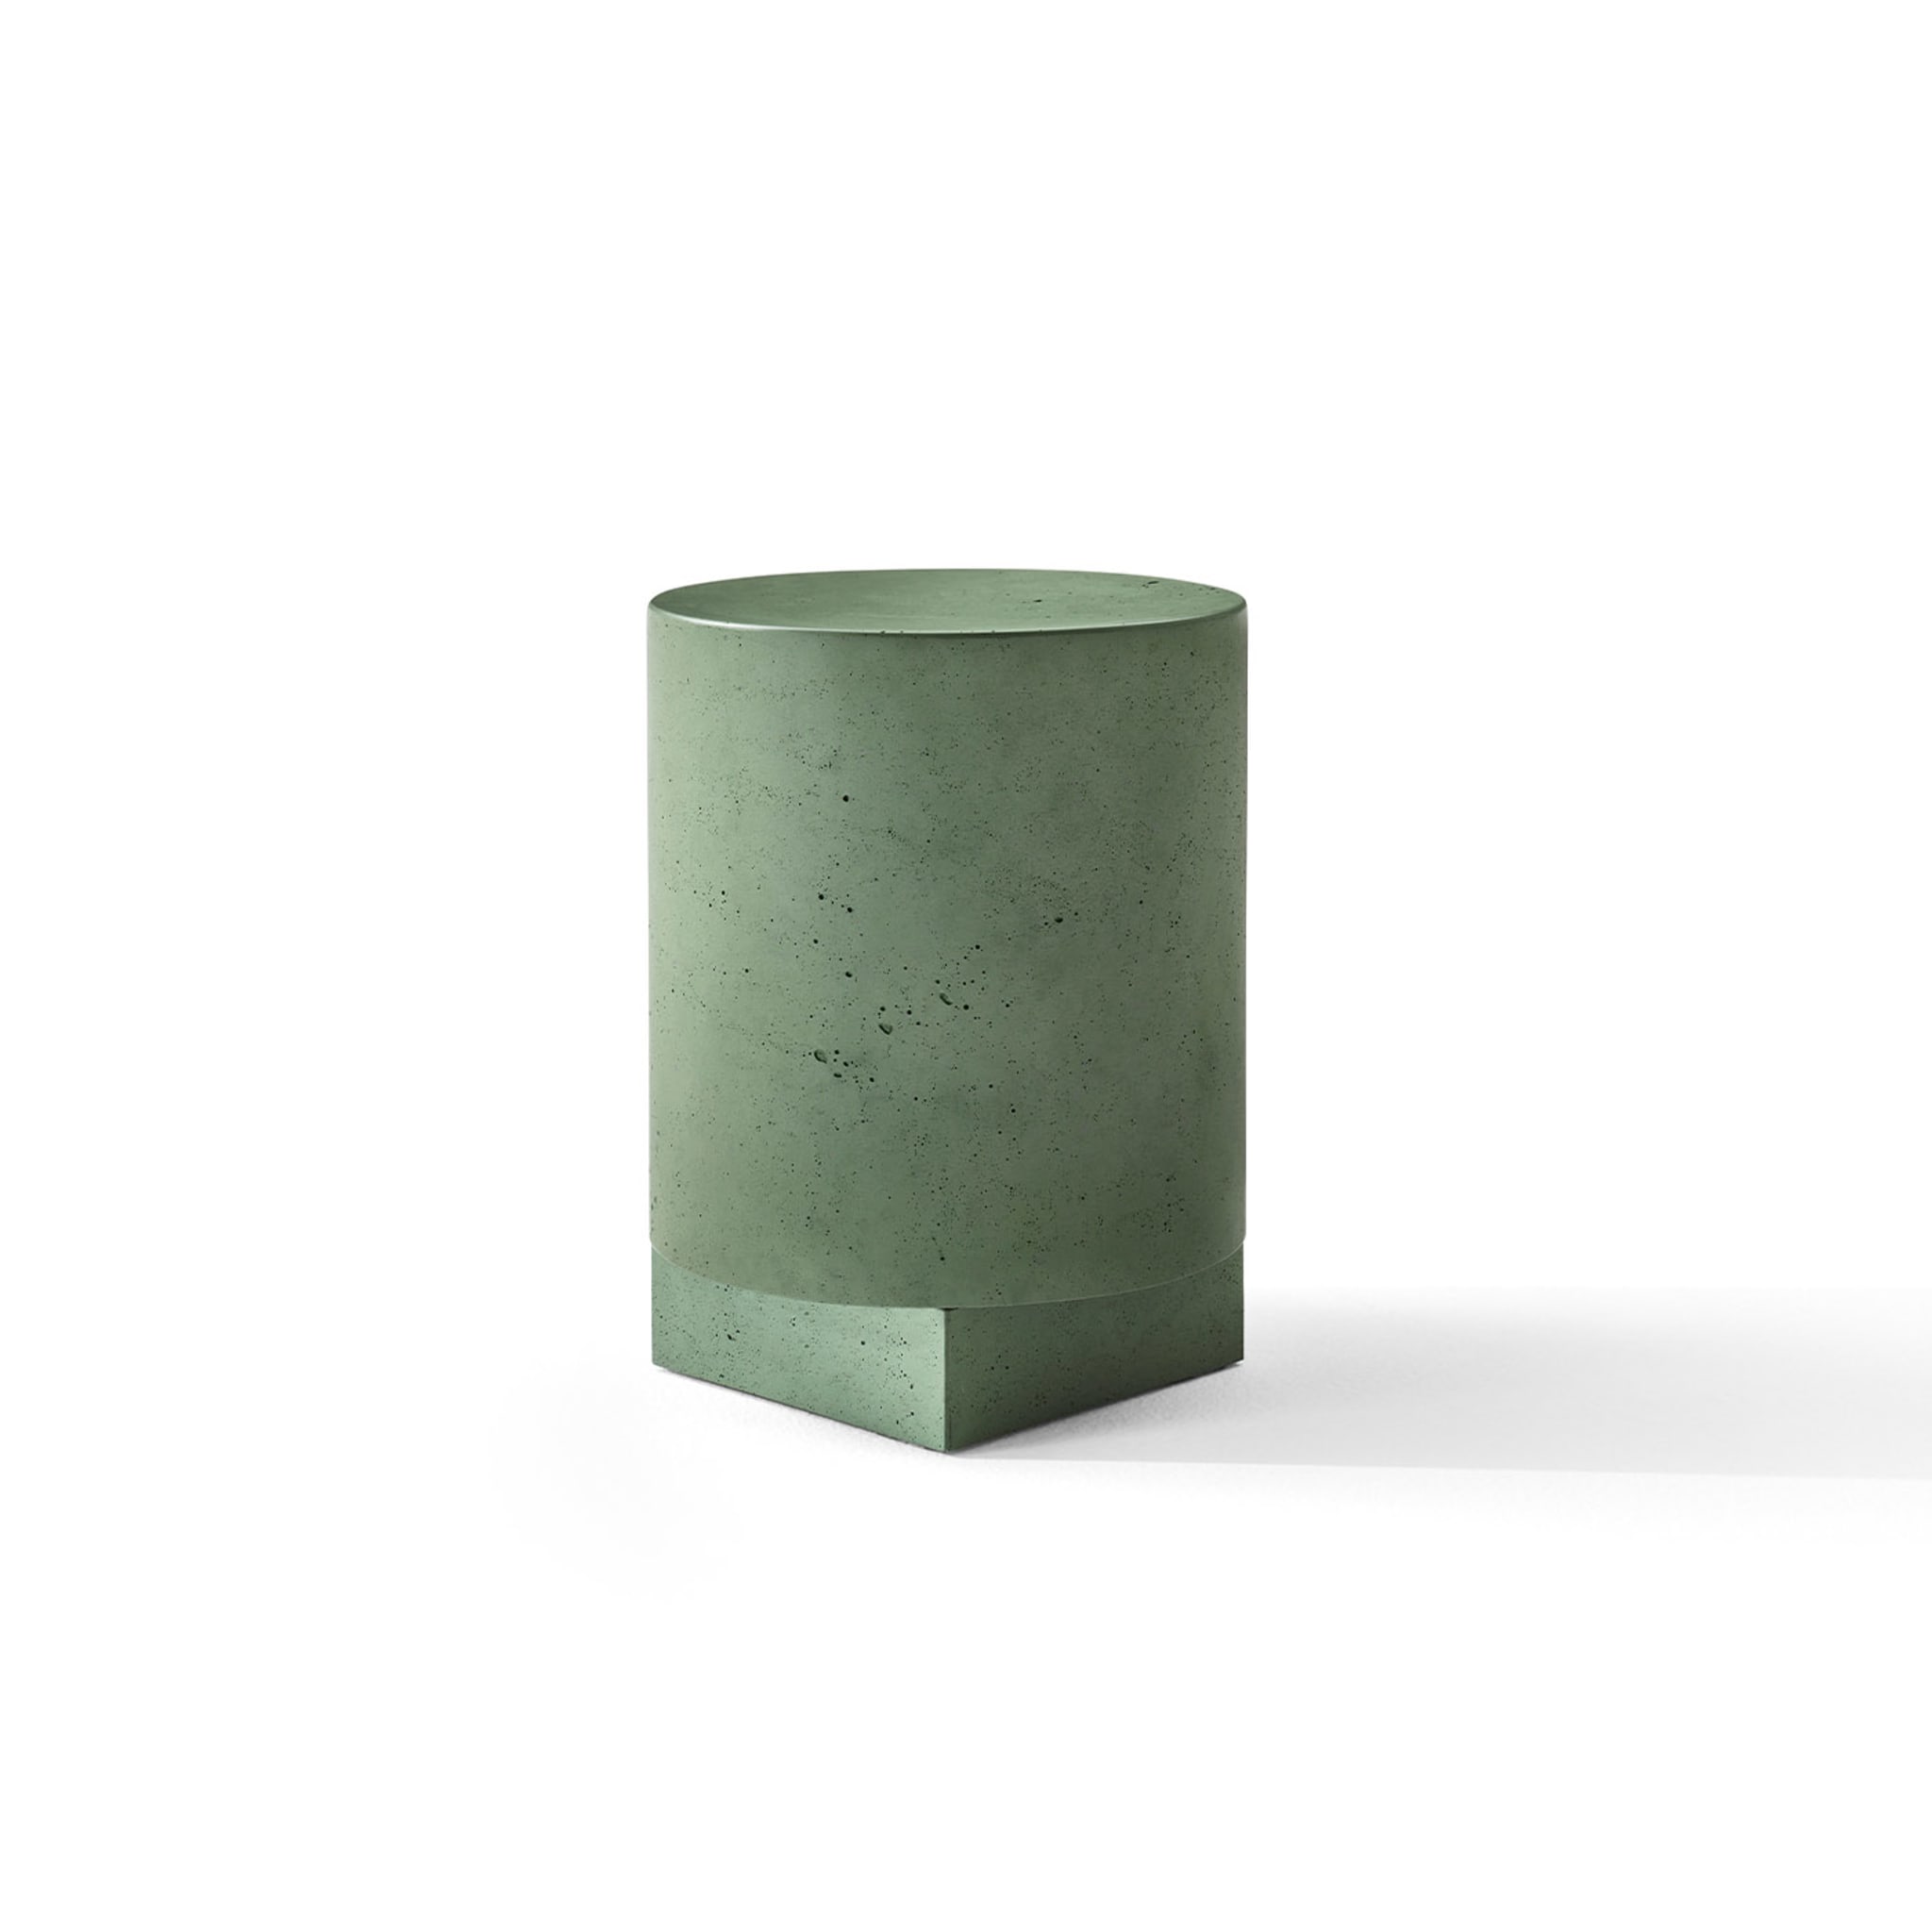 Tronchetto Stool by Parisotto and Formenton - Alternative view 3